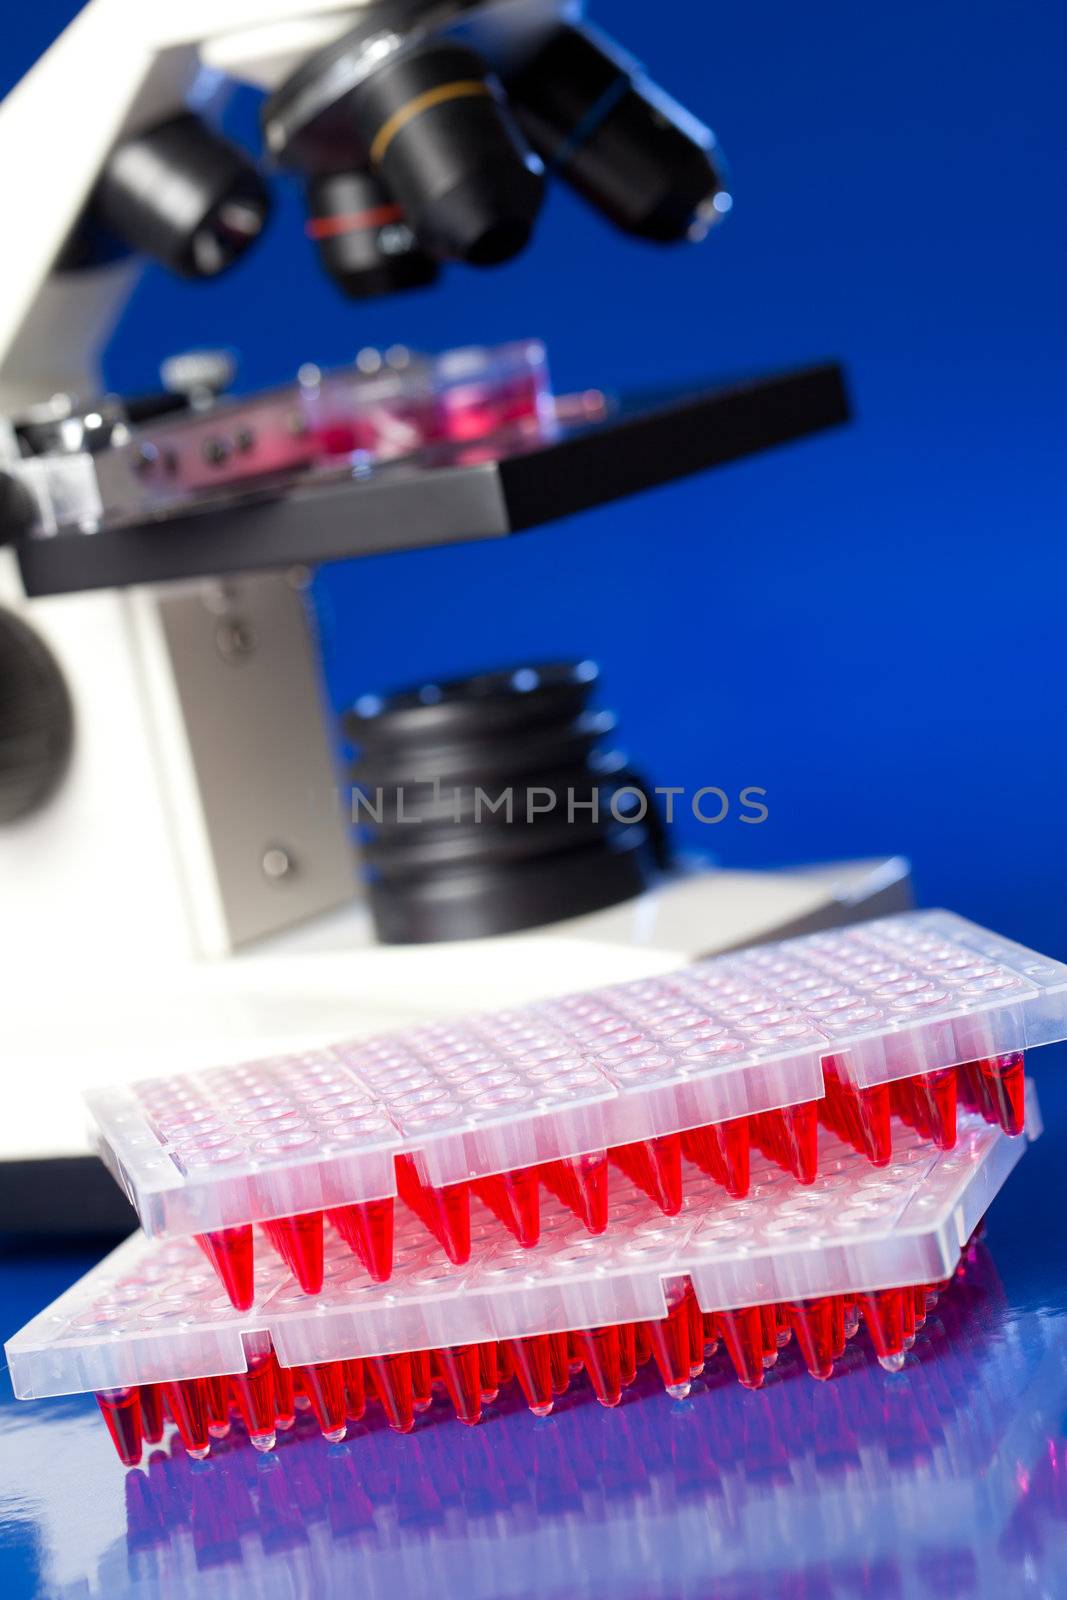 96 well plates on lab table with red liquid samples by motorolka